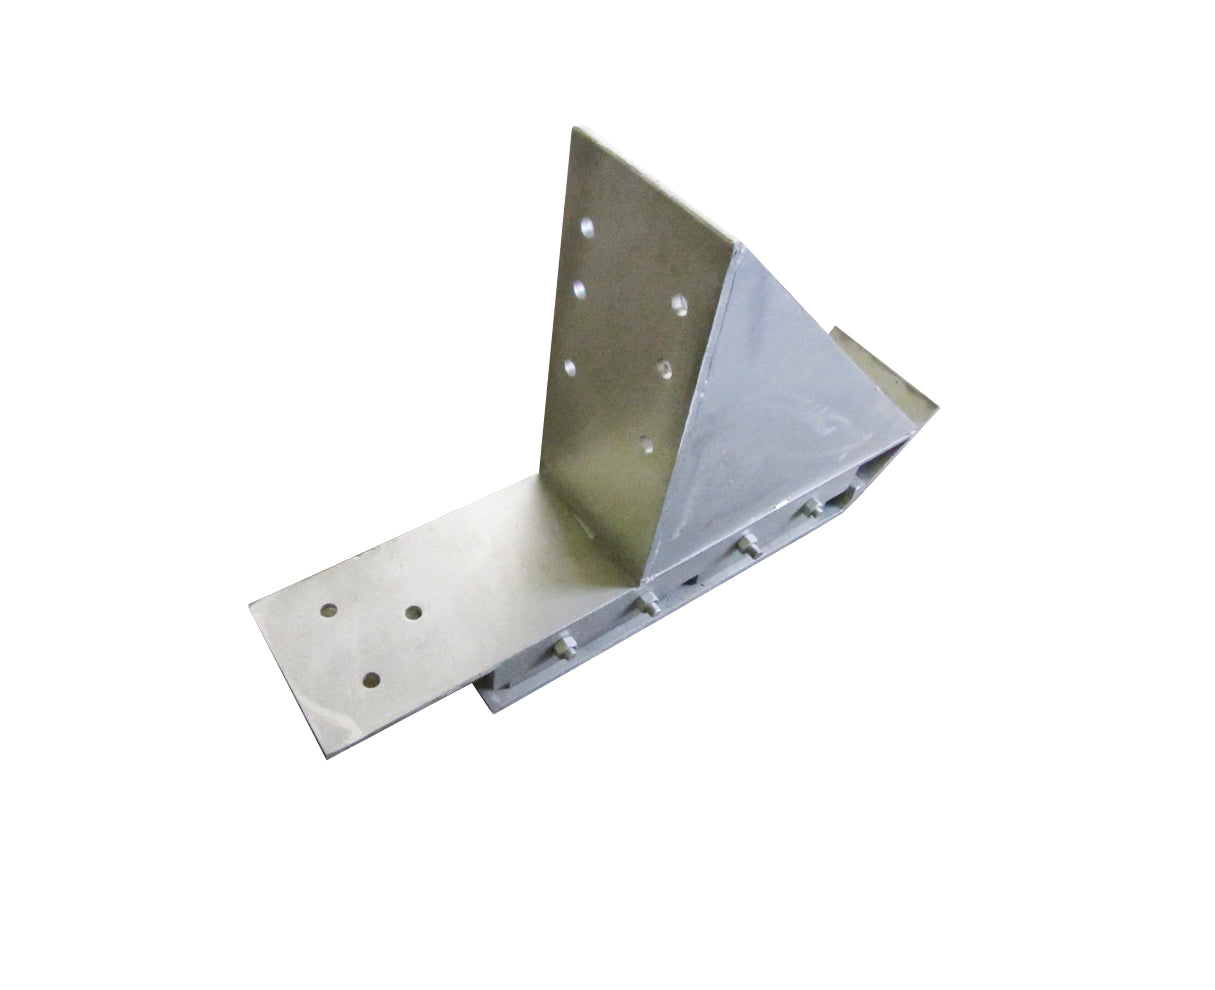 Laminated Steel Dock Bumper With Fixings - 960 x 590 x 20mm